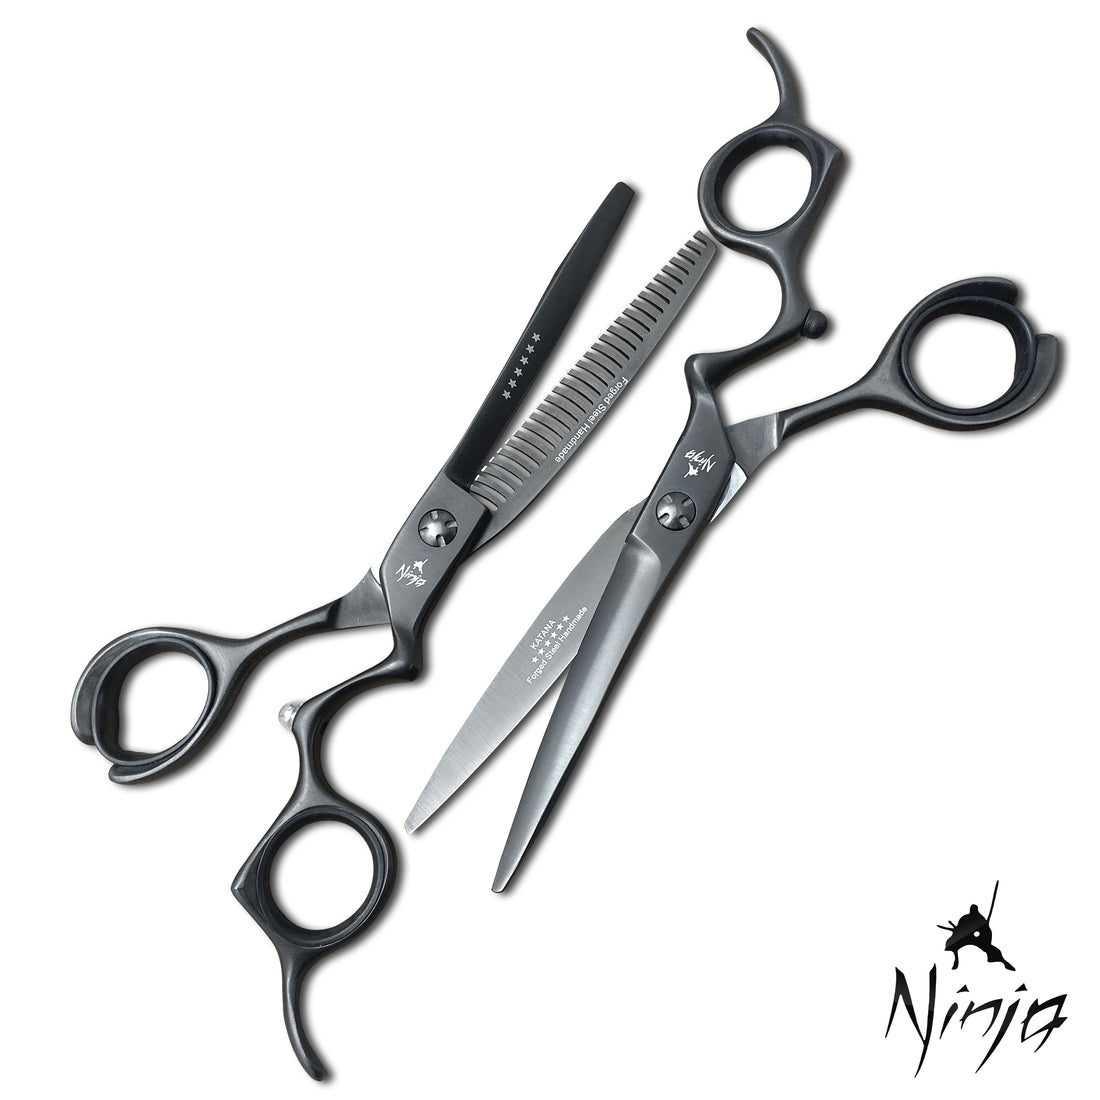 What Do Texturizing Shears Do? A Detailed Guide